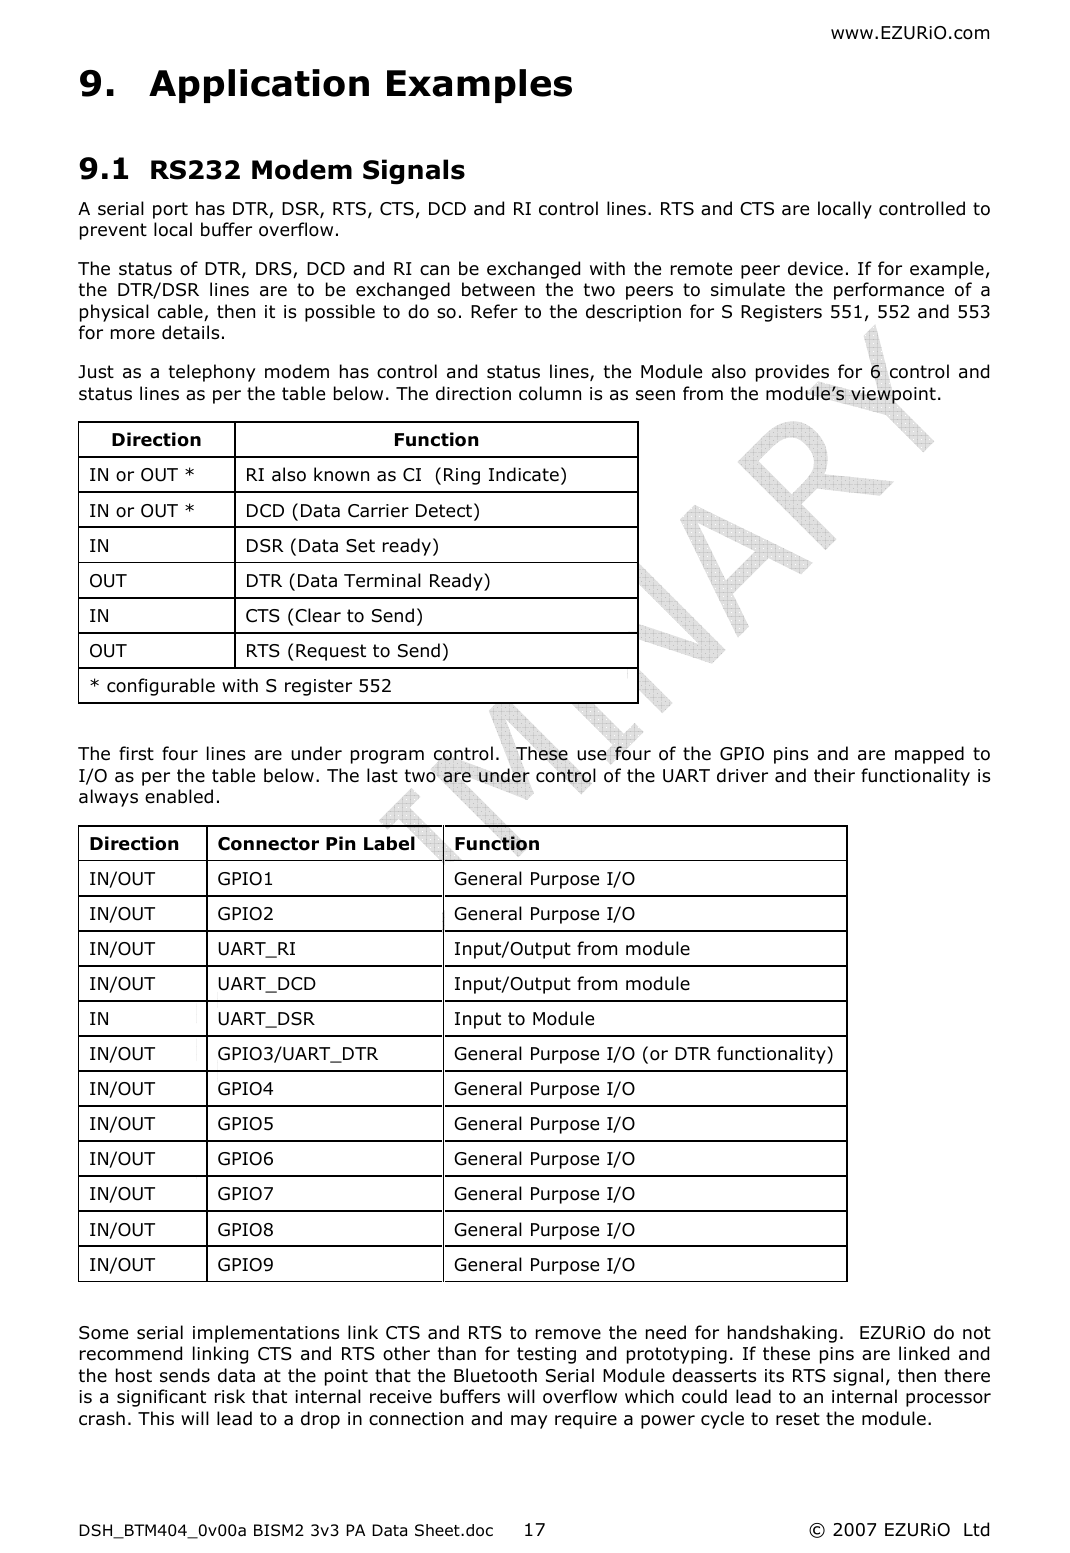 www.EZURiO.com DSH_BTM404_0v00a BISM2 3v3 PA Data Sheet.doc  © 2007 EZURiO  Ltd  179. Application Examples 9.1 RS232 Modem Signals A serial port has DTR, DSR, RTS, CTS, DCD and RI control lines. RTS and CTS are locally controlled to prevent local buffer overflow. The status of DTR, DRS, DCD and RI can be exchanged with the remote peer device. If for example, the  DTR/DSR  lines  are  to  be  exchanged  between  the  two  peers  to  simulate  the  performance  of  a physical cable, then it is possible to do so. Refer to the description for S Registers 551, 552 and 553 for more details. Just as a telephony modem has control and status lines, the Module also provides for 6 control and status lines as per the table below. The direction column is as seen from the module’s viewpoint. Direction  Function IN or OUT *  RI also known as CI  (Ring Indicate) IN or OUT *  DCD (Data Carrier Detect) IN  DSR (Data Set ready) OUT  DTR (Data Terminal Ready) IN  CTS (Clear to Send) OUT  RTS (Request to Send) * configurable with S register 552  The first four lines are under program control.  These use four of the GPIO pins and are mapped to I/O as per the table below. The last two are under control of the UART driver and their functionality is always enabled. Direction  Connector Pin Label  Function IN/OUT  GPIO1  General Purpose I/O IN/OUT  GPIO2  General Purpose I/O IN/OUT  UART_RI  Input/Output from module IN/OUT  UART_DCD  Input/Output from module IN  UART_DSR  Input to Module IN/OUT  GPIO3/UART_DTR  General Purpose I/O (or DTR functionality) IN/OUT  GPIO4  General Purpose I/O  IN/OUT  GPIO5  General Purpose I/O  IN/OUT  GPIO6  General Purpose I/O  IN/OUT  GPIO7  General Purpose I/O  IN/OUT  GPIO8  General Purpose I/O  IN/OUT  GPIO9  General Purpose I/O   Some serial implementations link CTS and RTS to remove the need for handshaking.  EZURiO do not recommend linking CTS and RTS other than for testing and prototyping. If these pins are linked and the host sends data at the point that the Bluetooth Serial Module deasserts its RTS signal, then there is a significant risk that internal receive buffers will overflow which could lead to an internal processor crash. This will lead to a drop in connection and may require a power cycle to reset the module.  